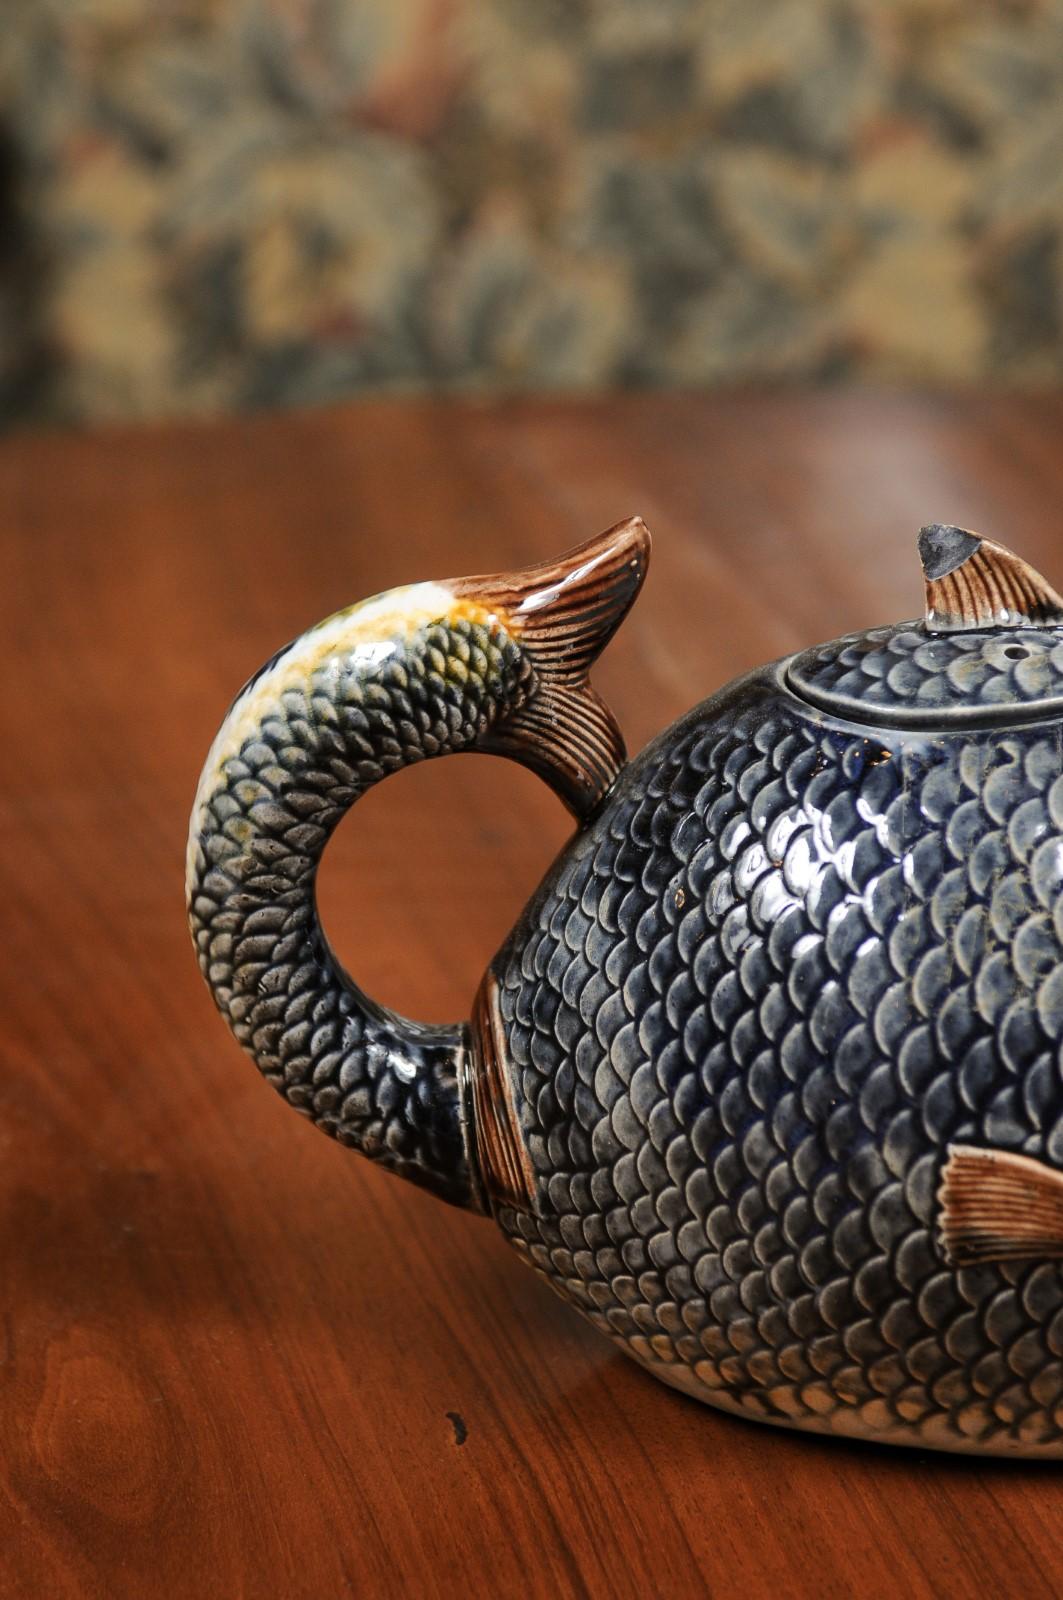 French 1885s Glazed Majolica Teapot Depicting a Fish Eating Another Fish 2